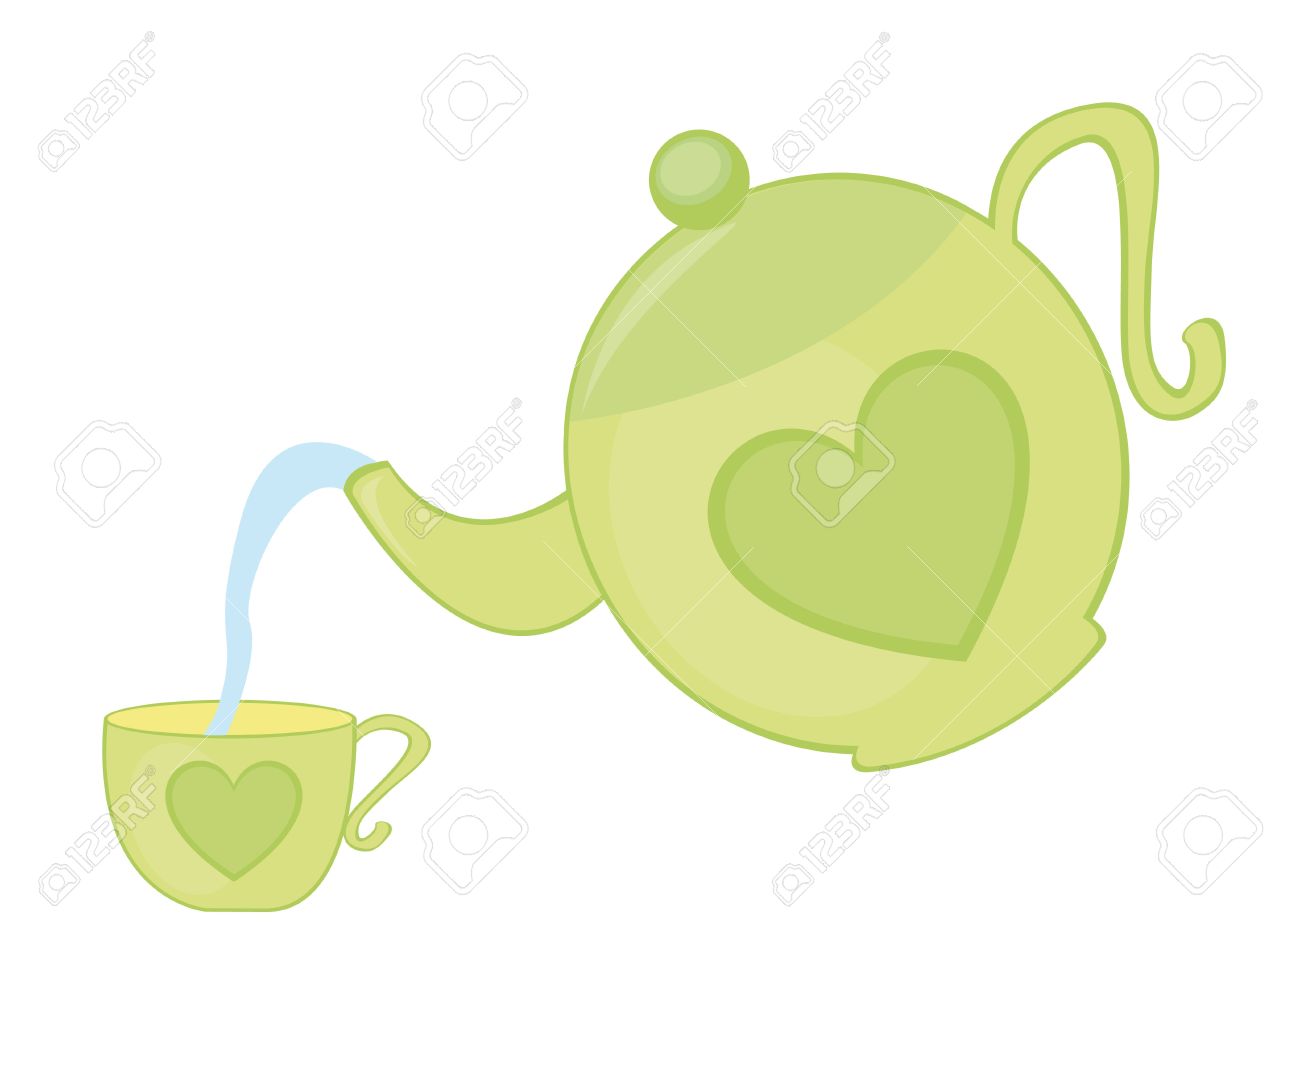 clipart teapot and cup - photo #25